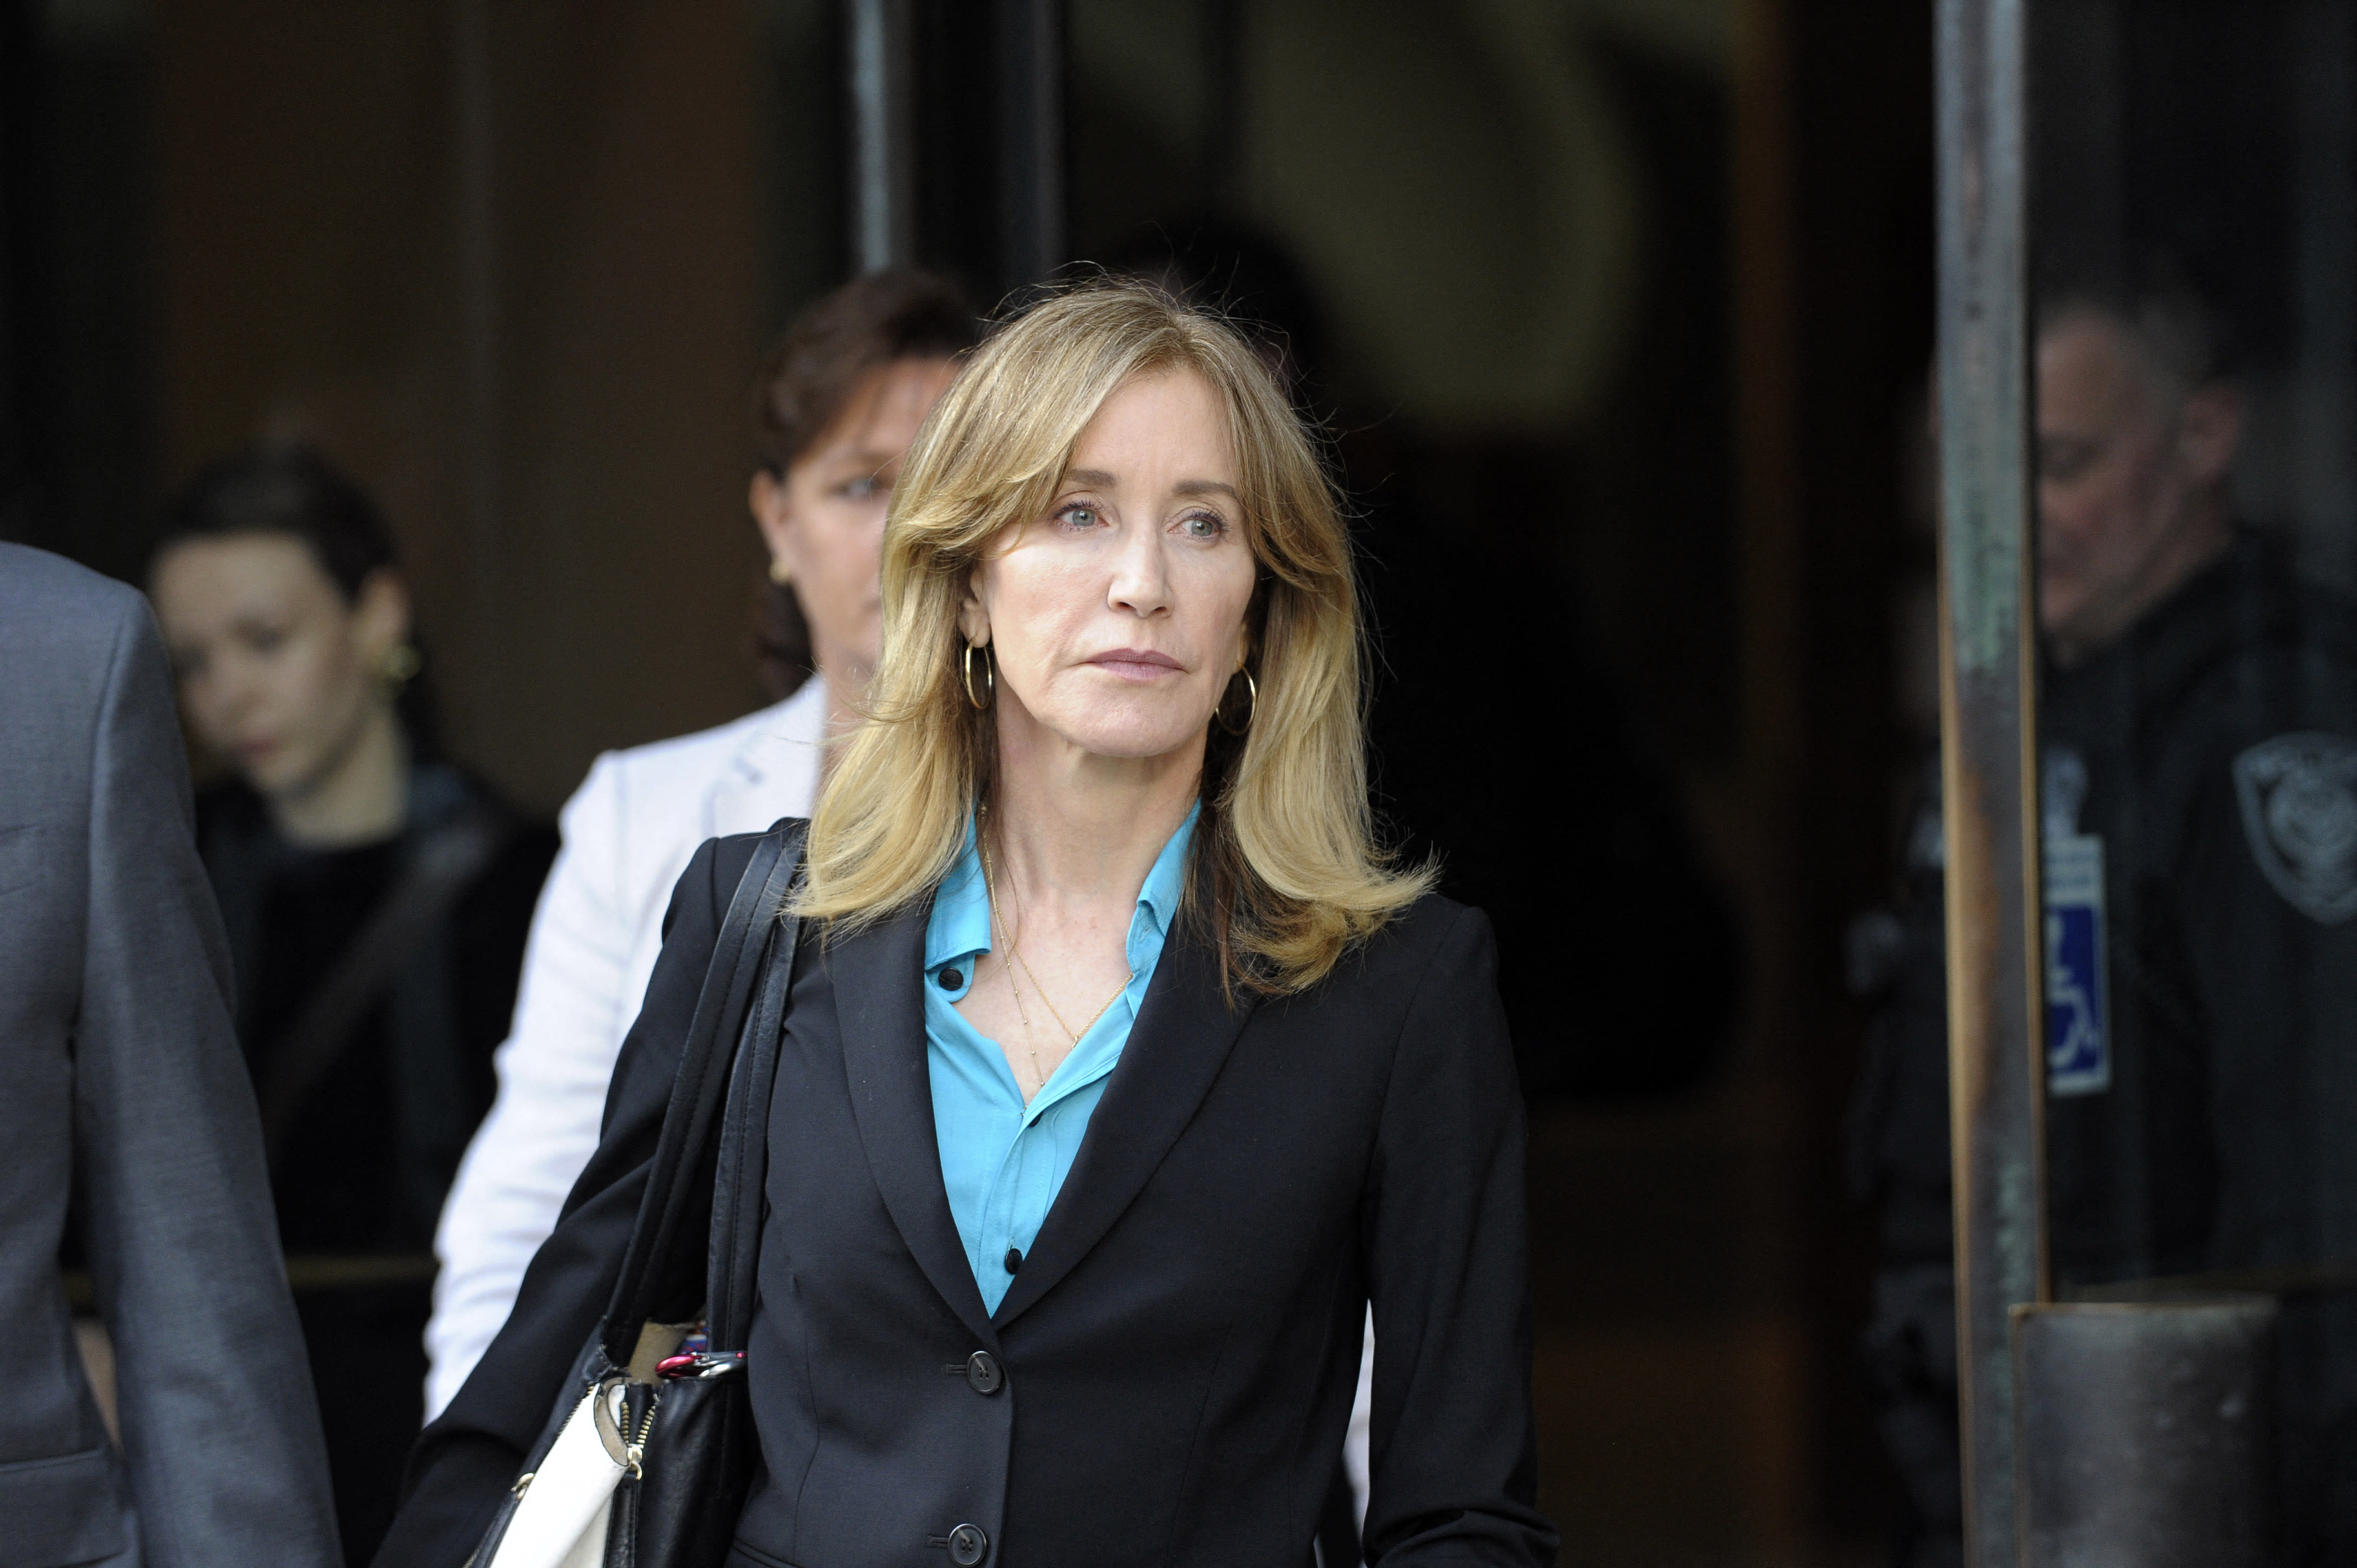 Felicity Huffman ‘Doesn’t Have Meaningful Relationships’ After College Admission Scandal